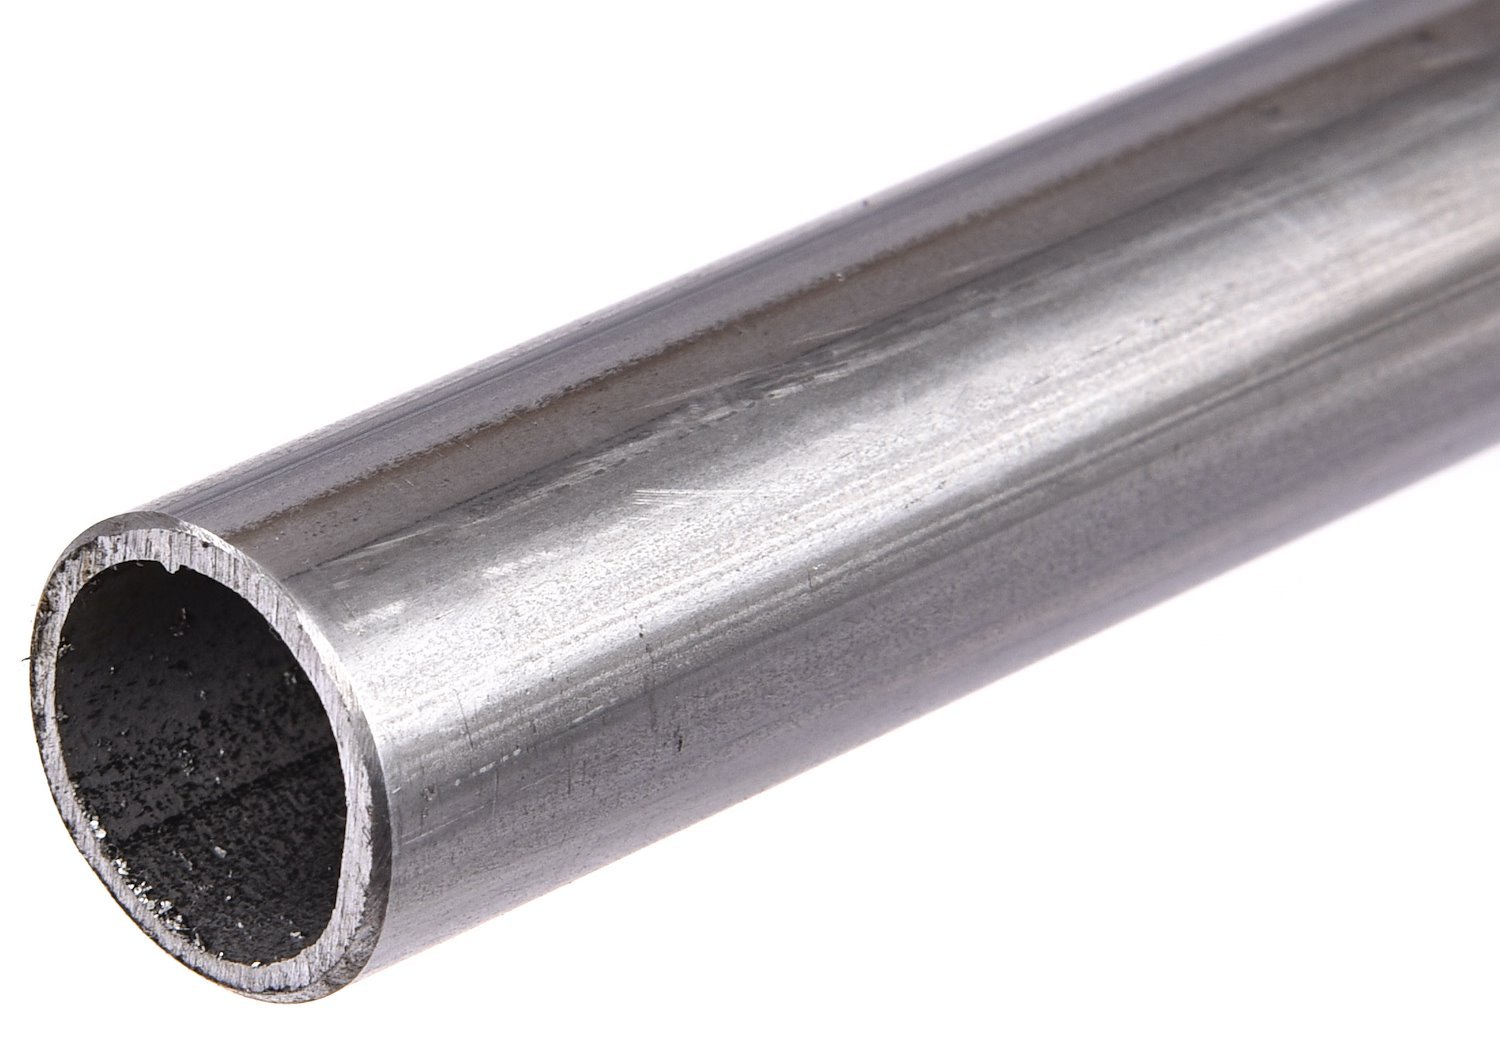 Mild Steel Tubing [Round, 3/4 in. Diameter x 0.065 in. Thickness x 4 ft. Length]